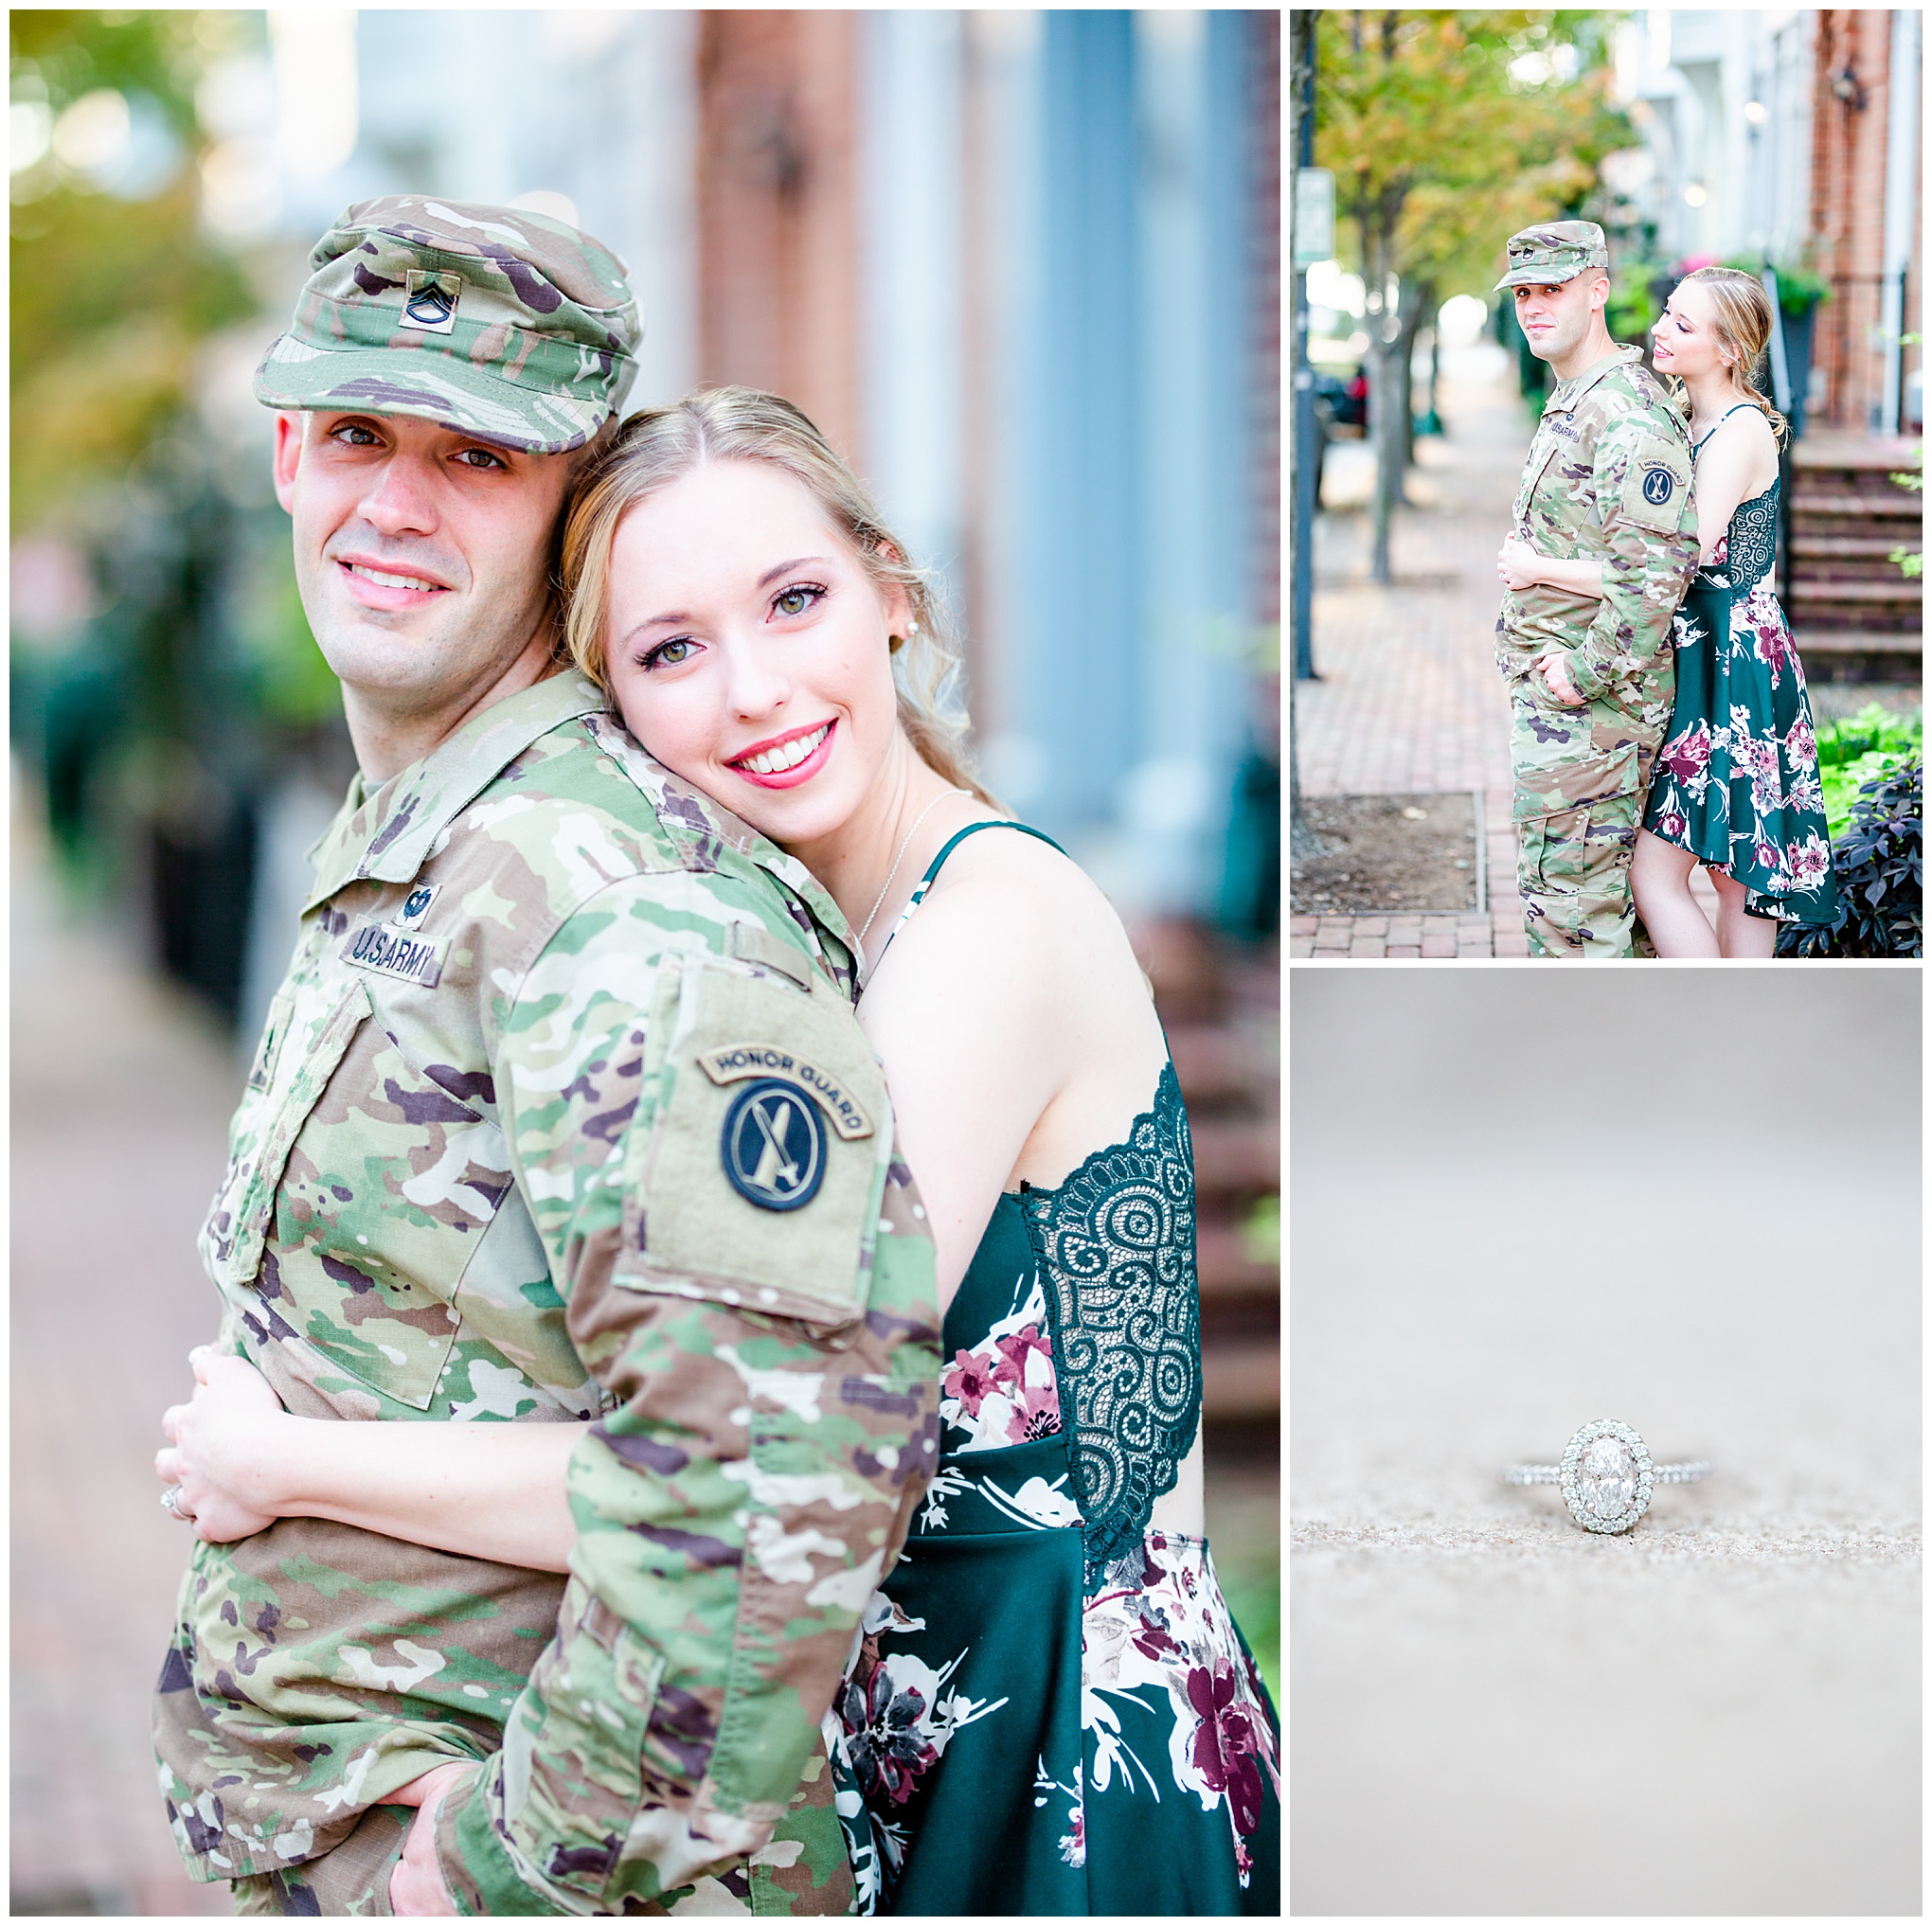 sunrise Old Town Alexandria engagement photos, Alexandria Virginia photographer, D.C. engagement photographer, D.C. wedding photographer, D.C. wedding photography, Old Town Alexandria, Alexandria engagement photos, natural light engagement photos, engagement photos ideas, summer engagement photos, engagement session outfits, classic engagement photos, green floral print dress, oval diamond engagement ring